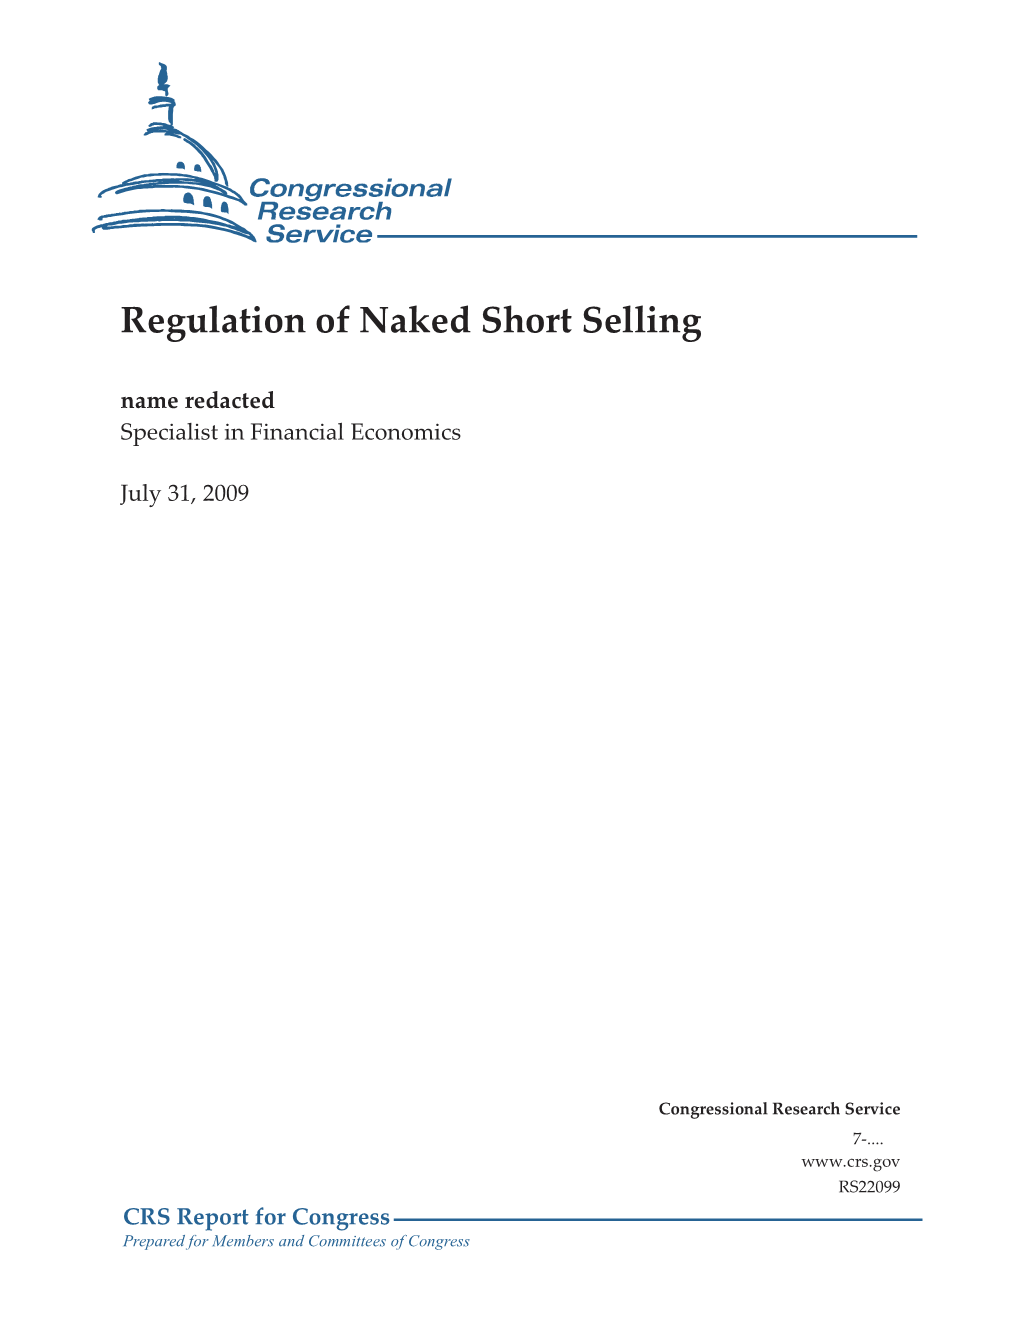 Regulation of Naked Short Selling Name Redacted Specialist in Financial Economics